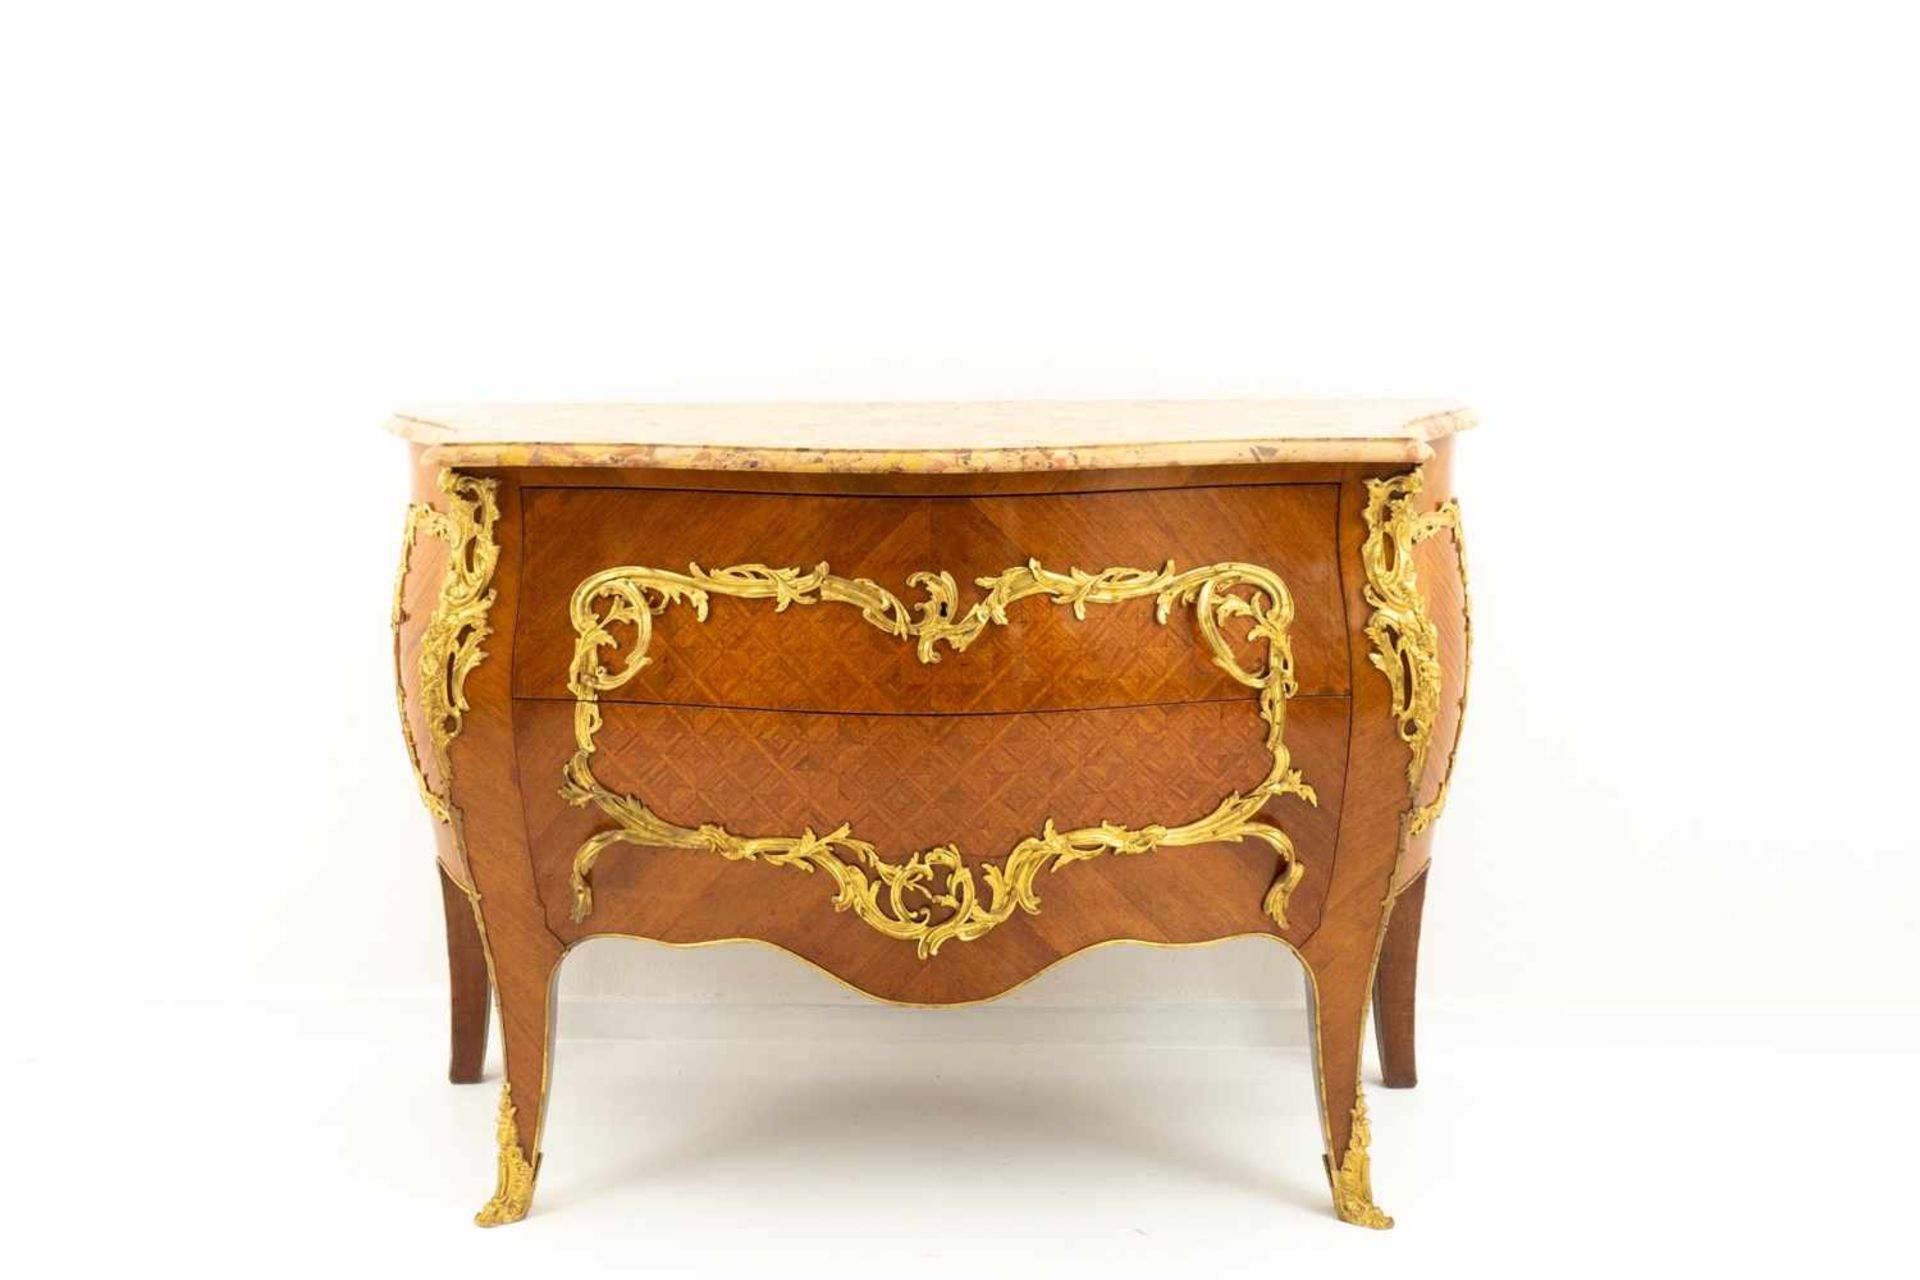 Bulging ornate chest of drawers with bronze appliqué< - Image 2 of 8